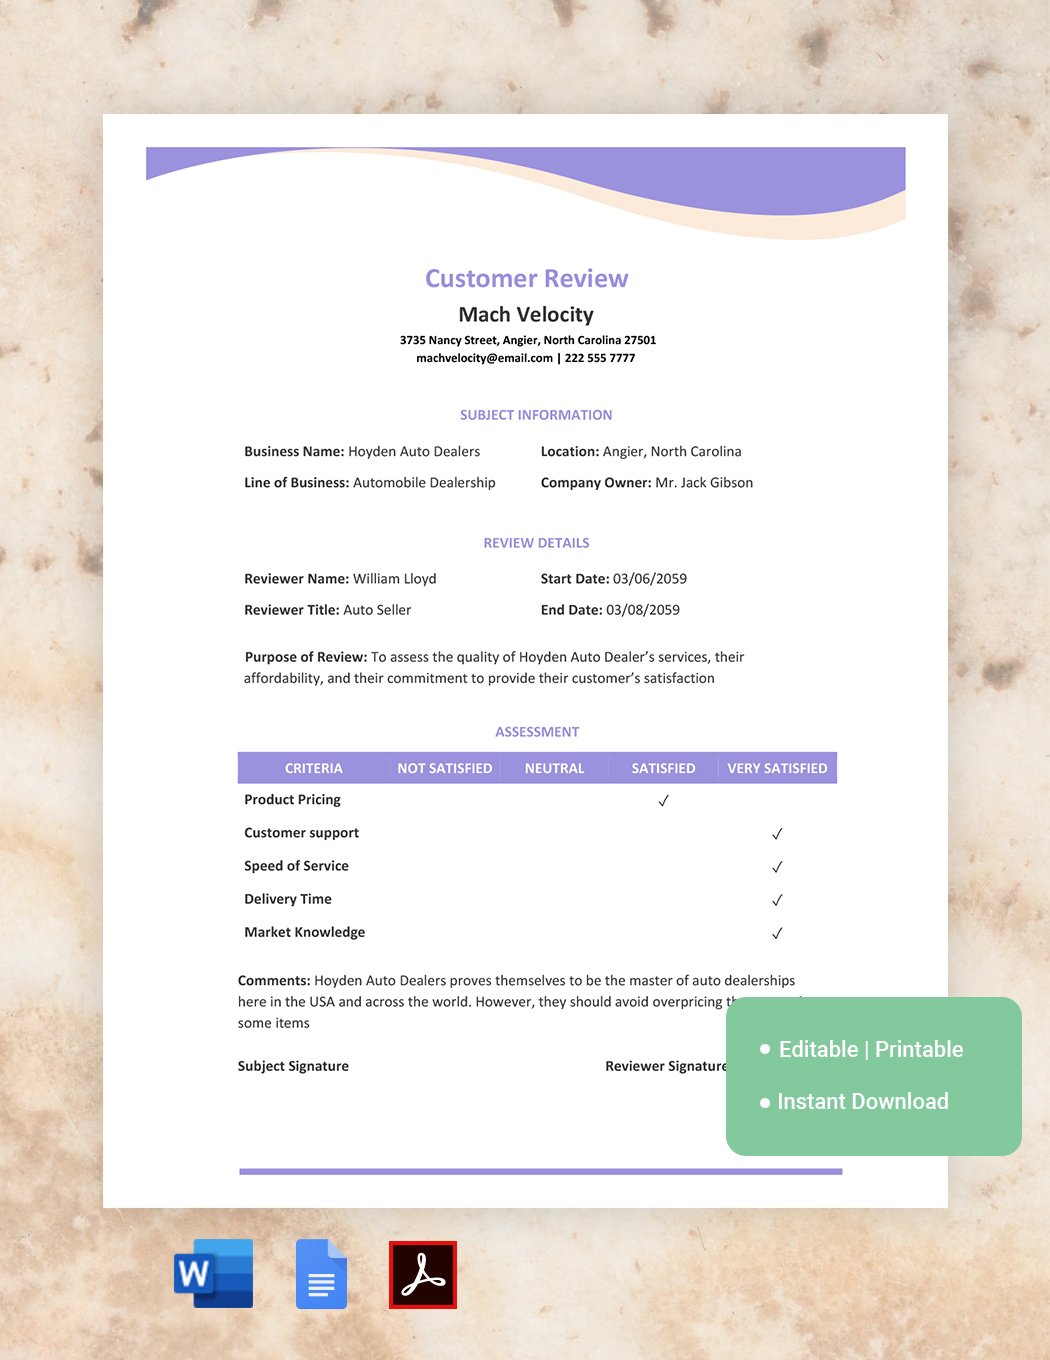 Customer Review Template in Word, Google Docs